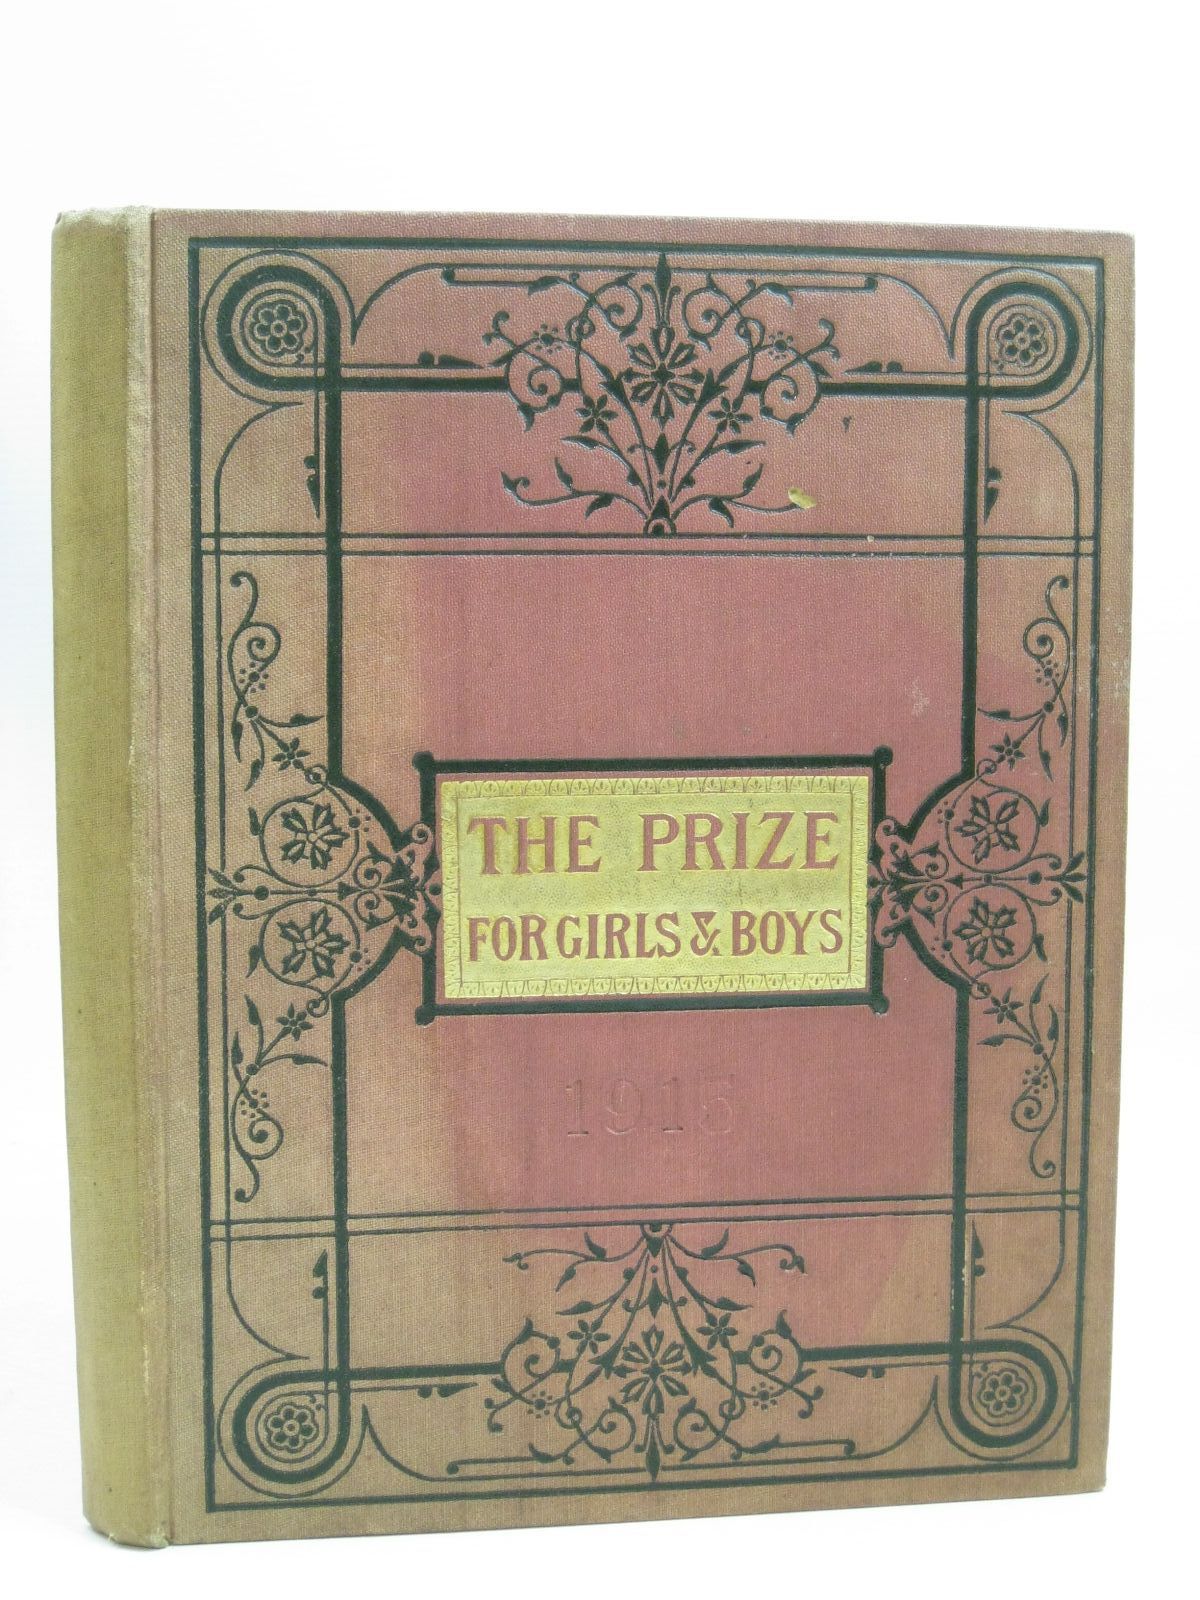 Photo of THE PRIZE FOR GIRLS AND BOYS 1915 published by Wells Gardner, Darton &amp; Co. Ltd. (STOCK CODE: 1506238)  for sale by Stella & Rose's Books